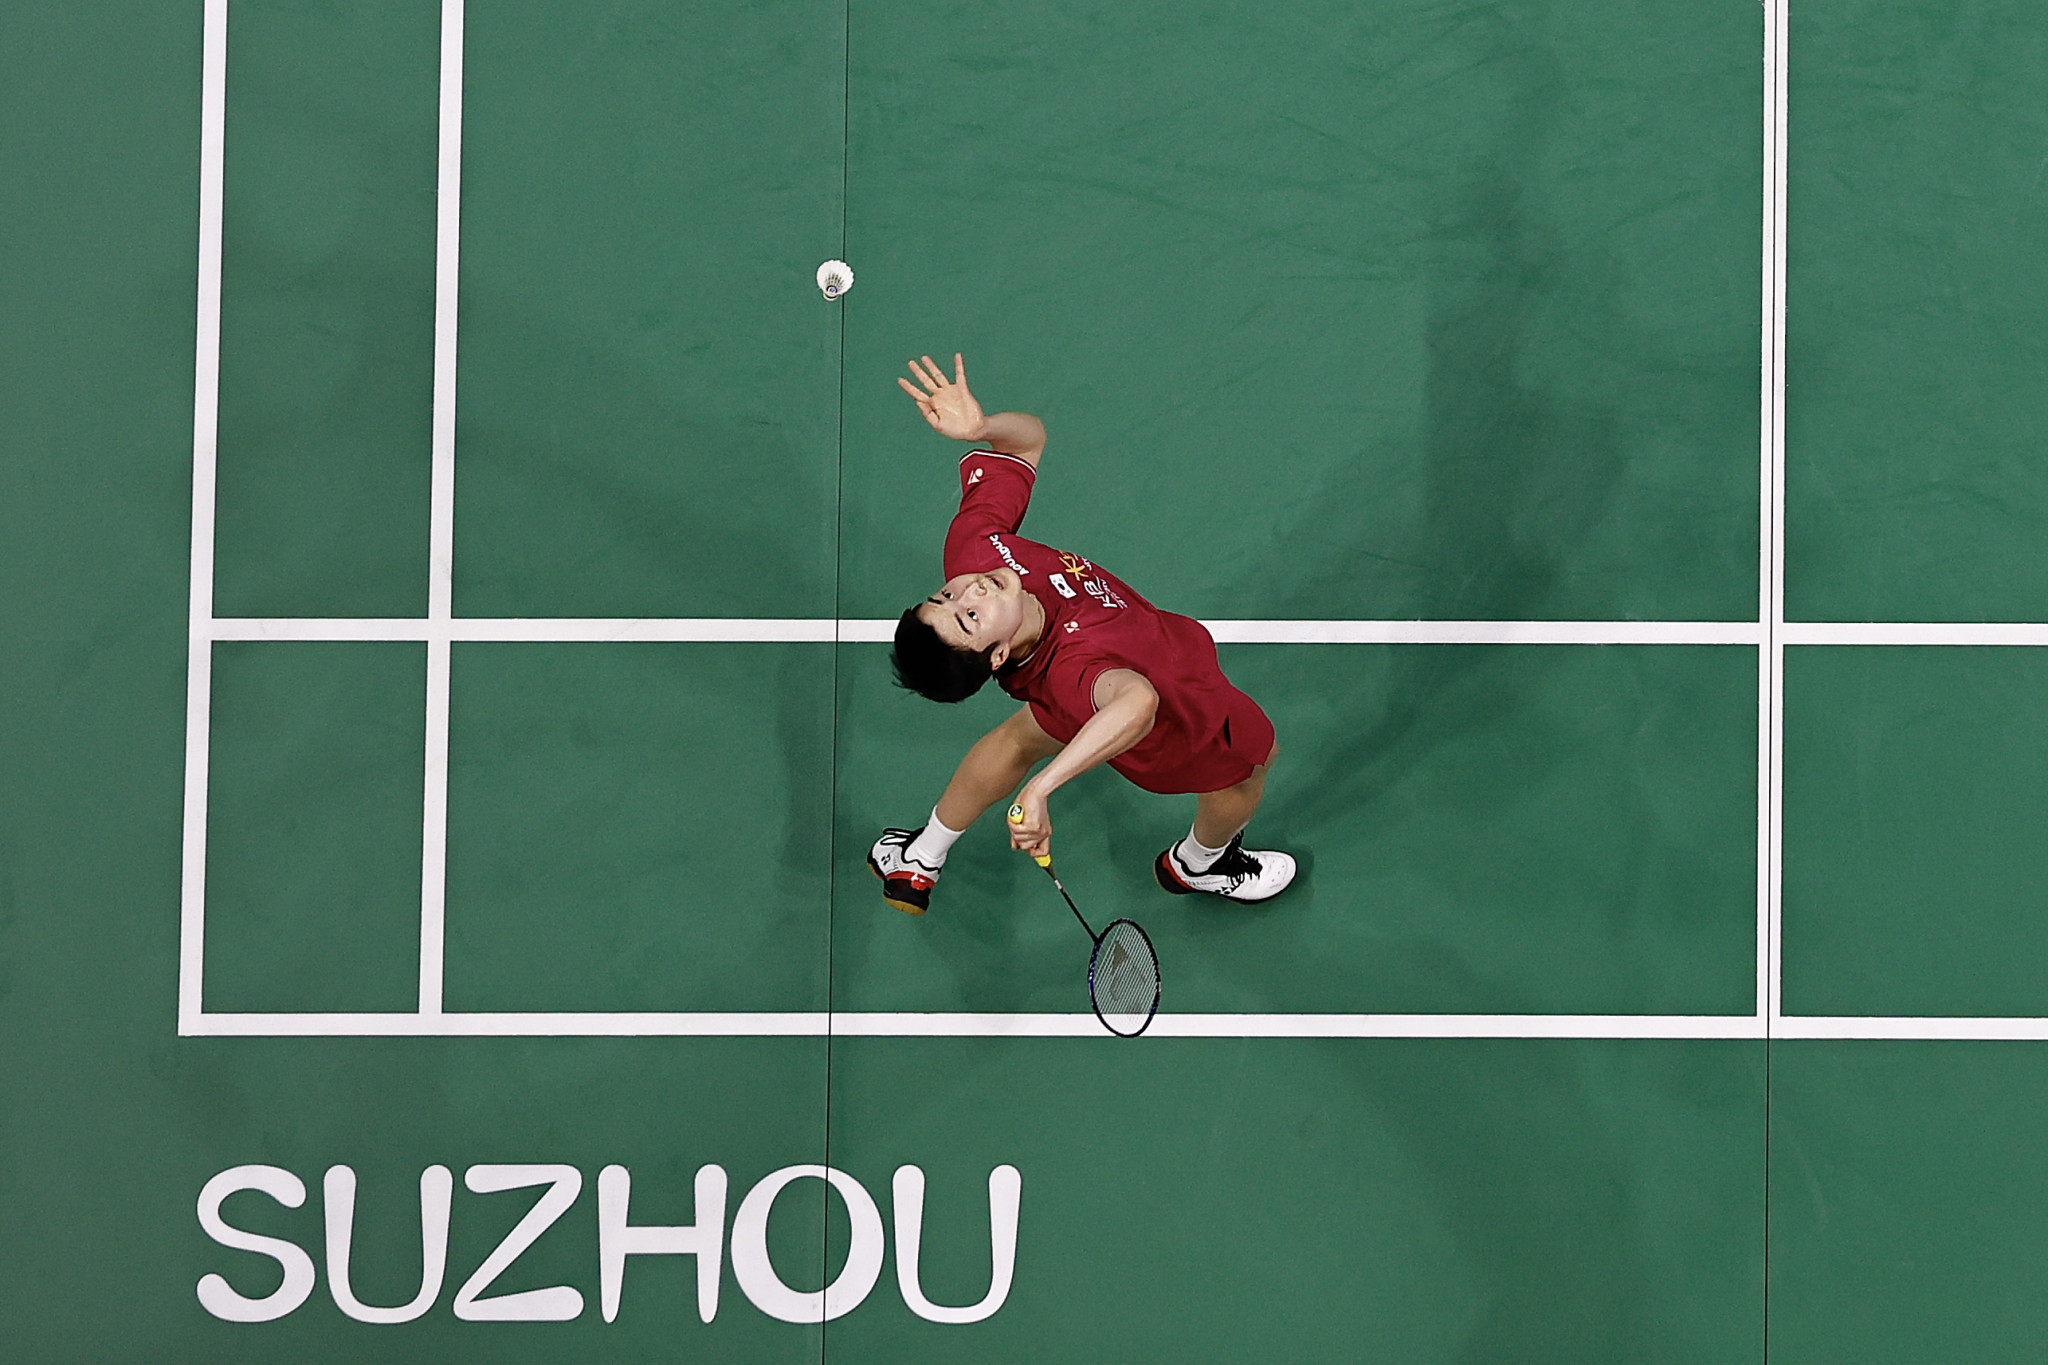 Lee Zii Jia triumphed in his men's singles tie as South Korea overcame Malaysia in the semi-finals in Suzhou ©Getty Images